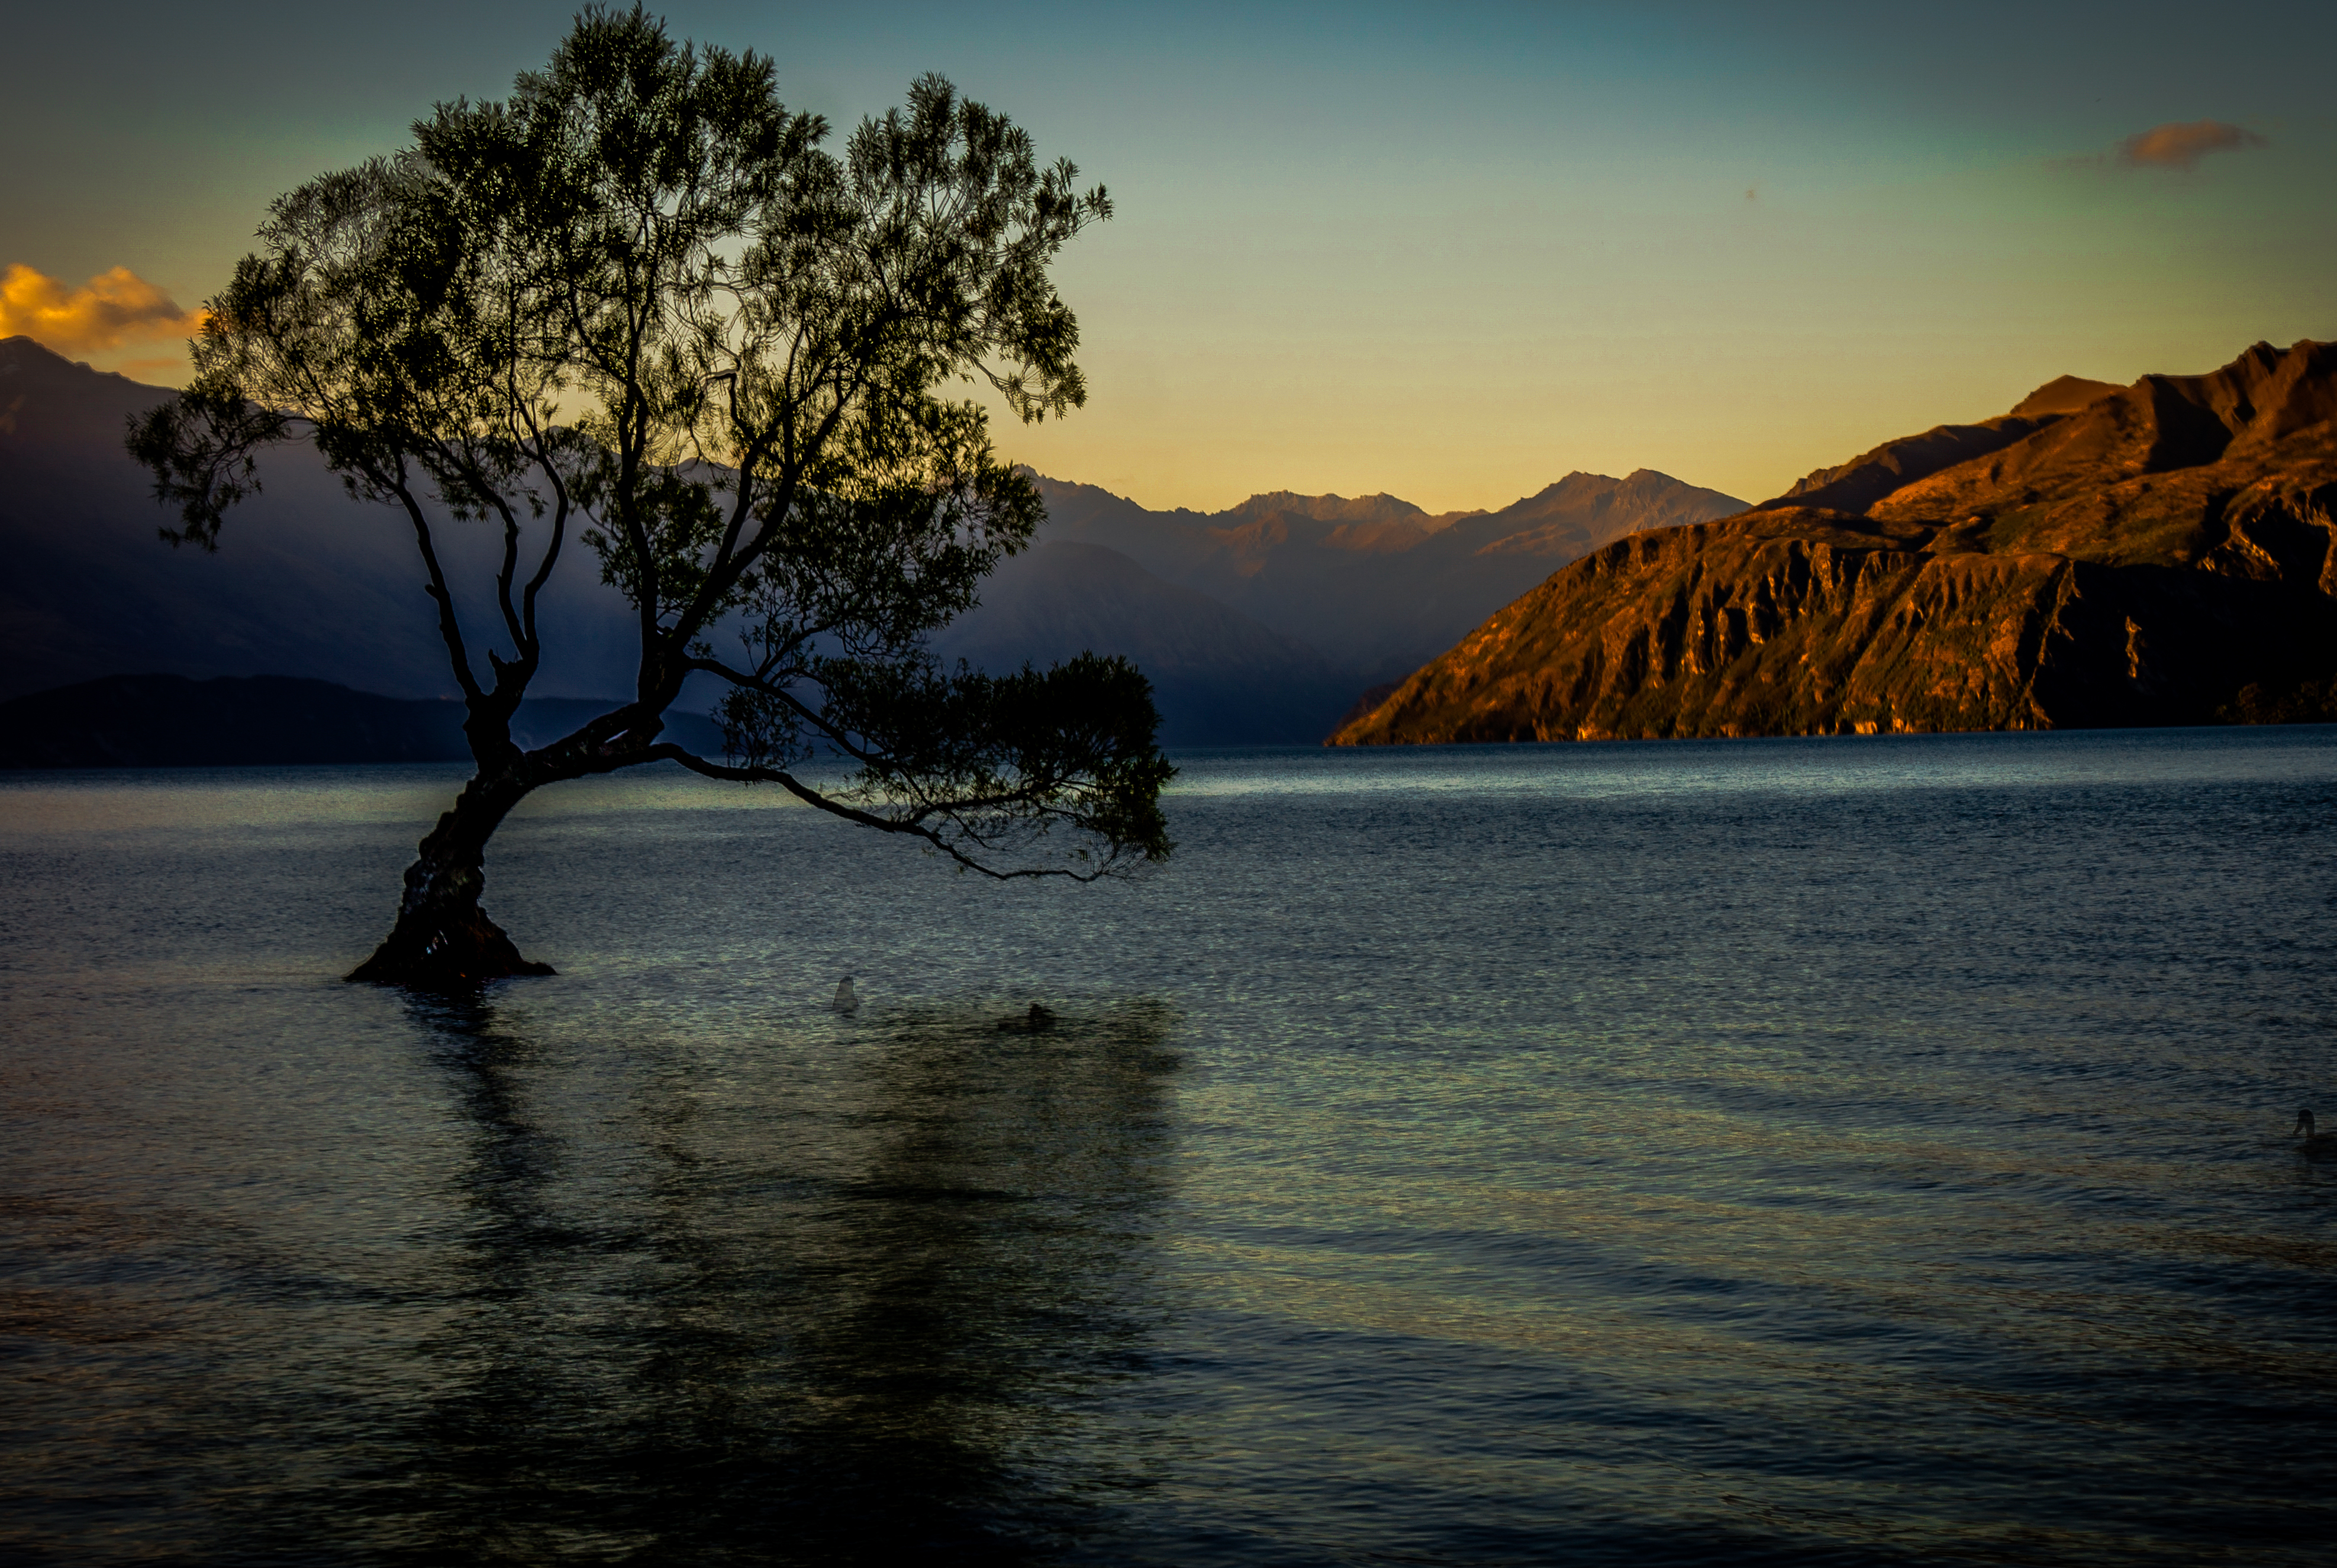 Visiting the Lone Tree of Wanaka in New Zealand - Wandering and ...